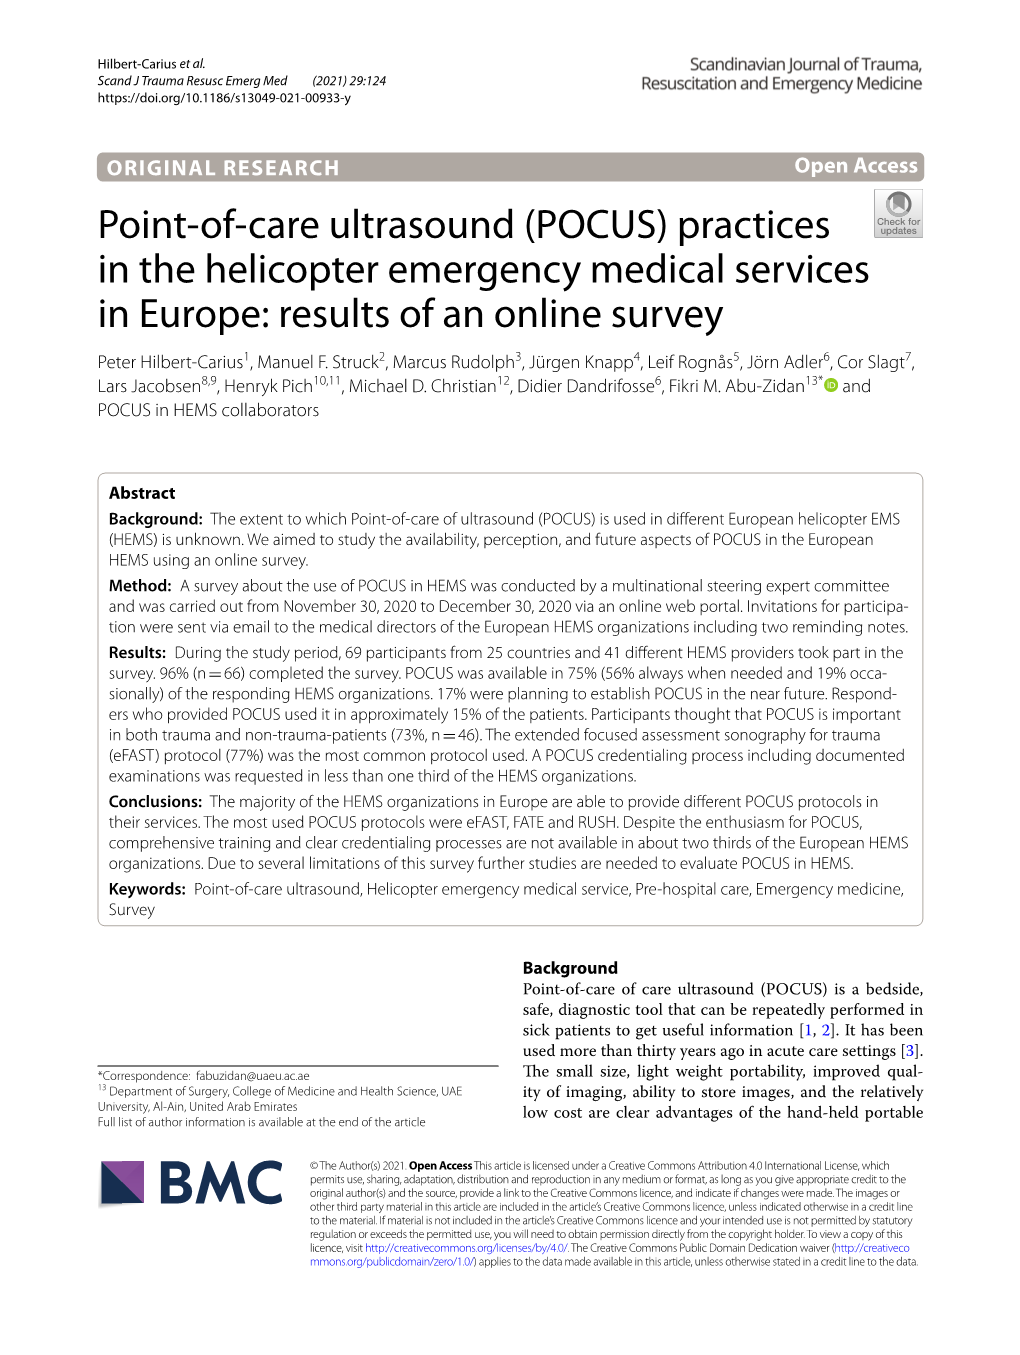 Practices in the Helicopter Emergency Medical Services in Europe: Results of an Online Survey Peter Hilbert‑Carius1, Manuel F